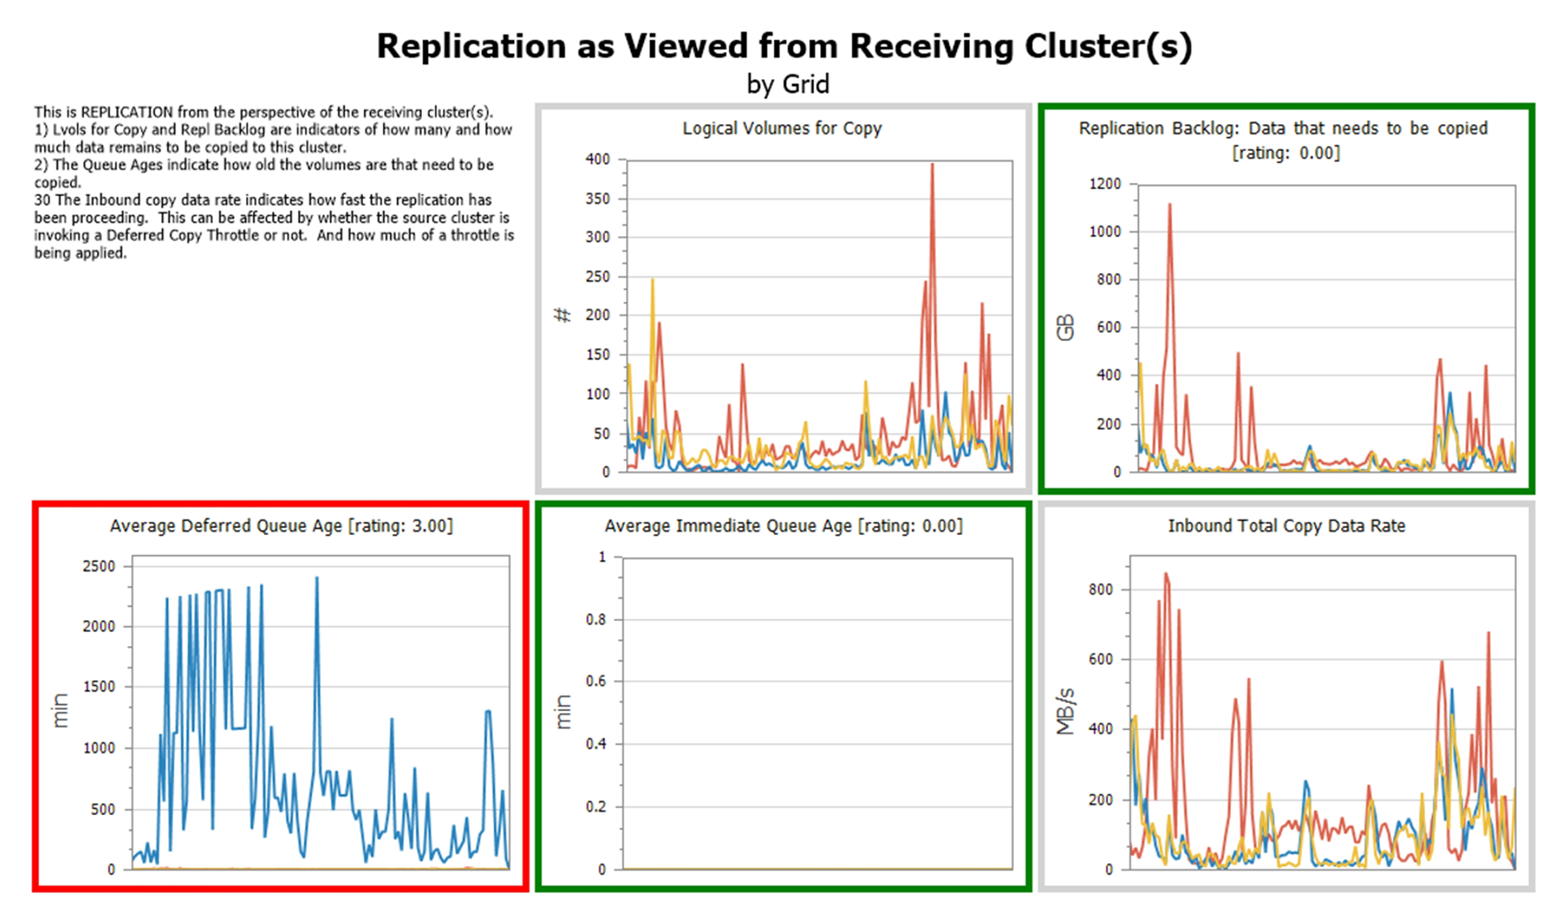 Replication as viewed from receiving cluster